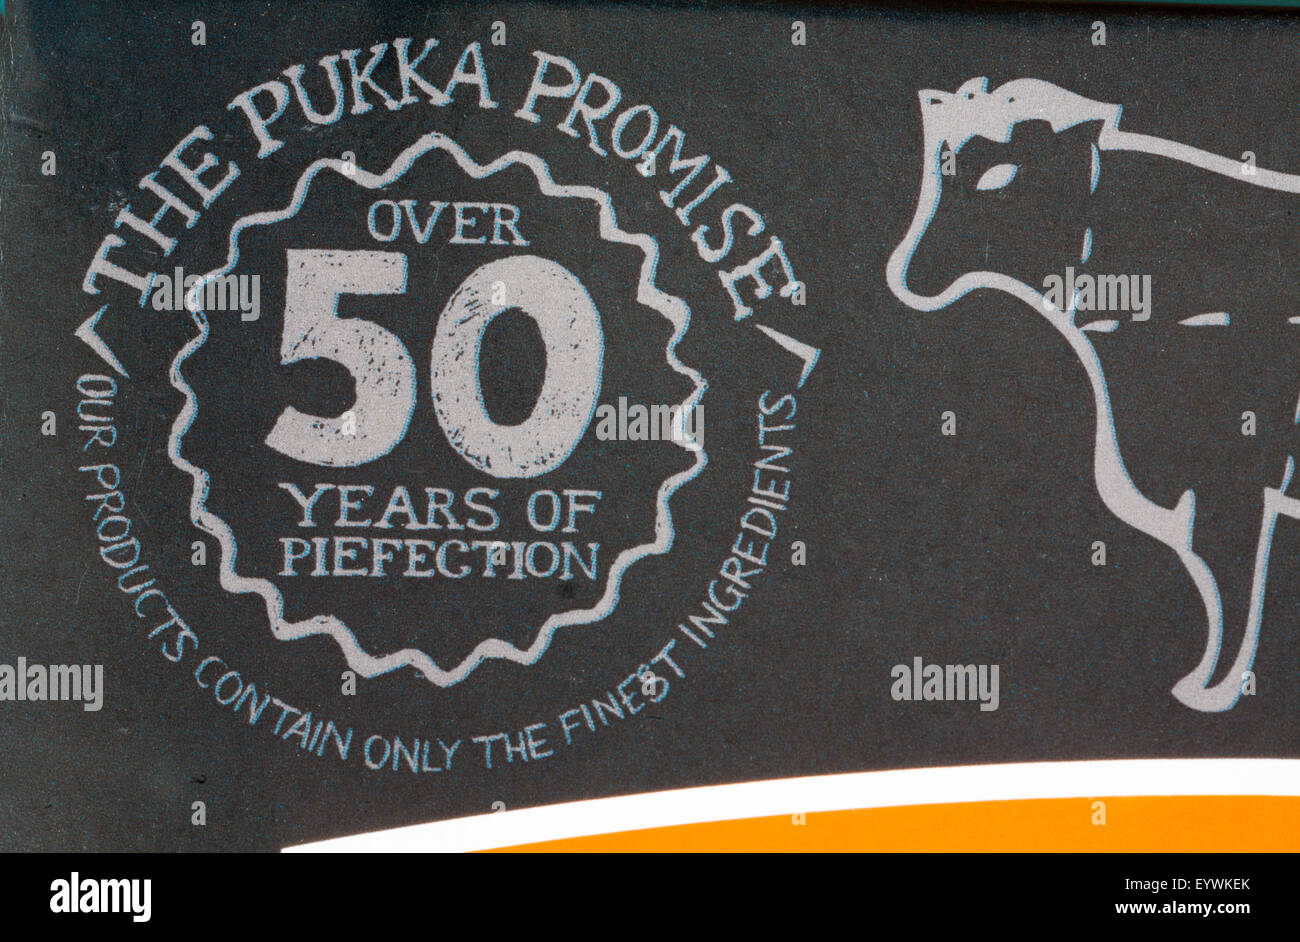 The Pukka promise over 50 years of piefection our products contain only the finest ingredients - information on Pukka-pies box Stock Photo